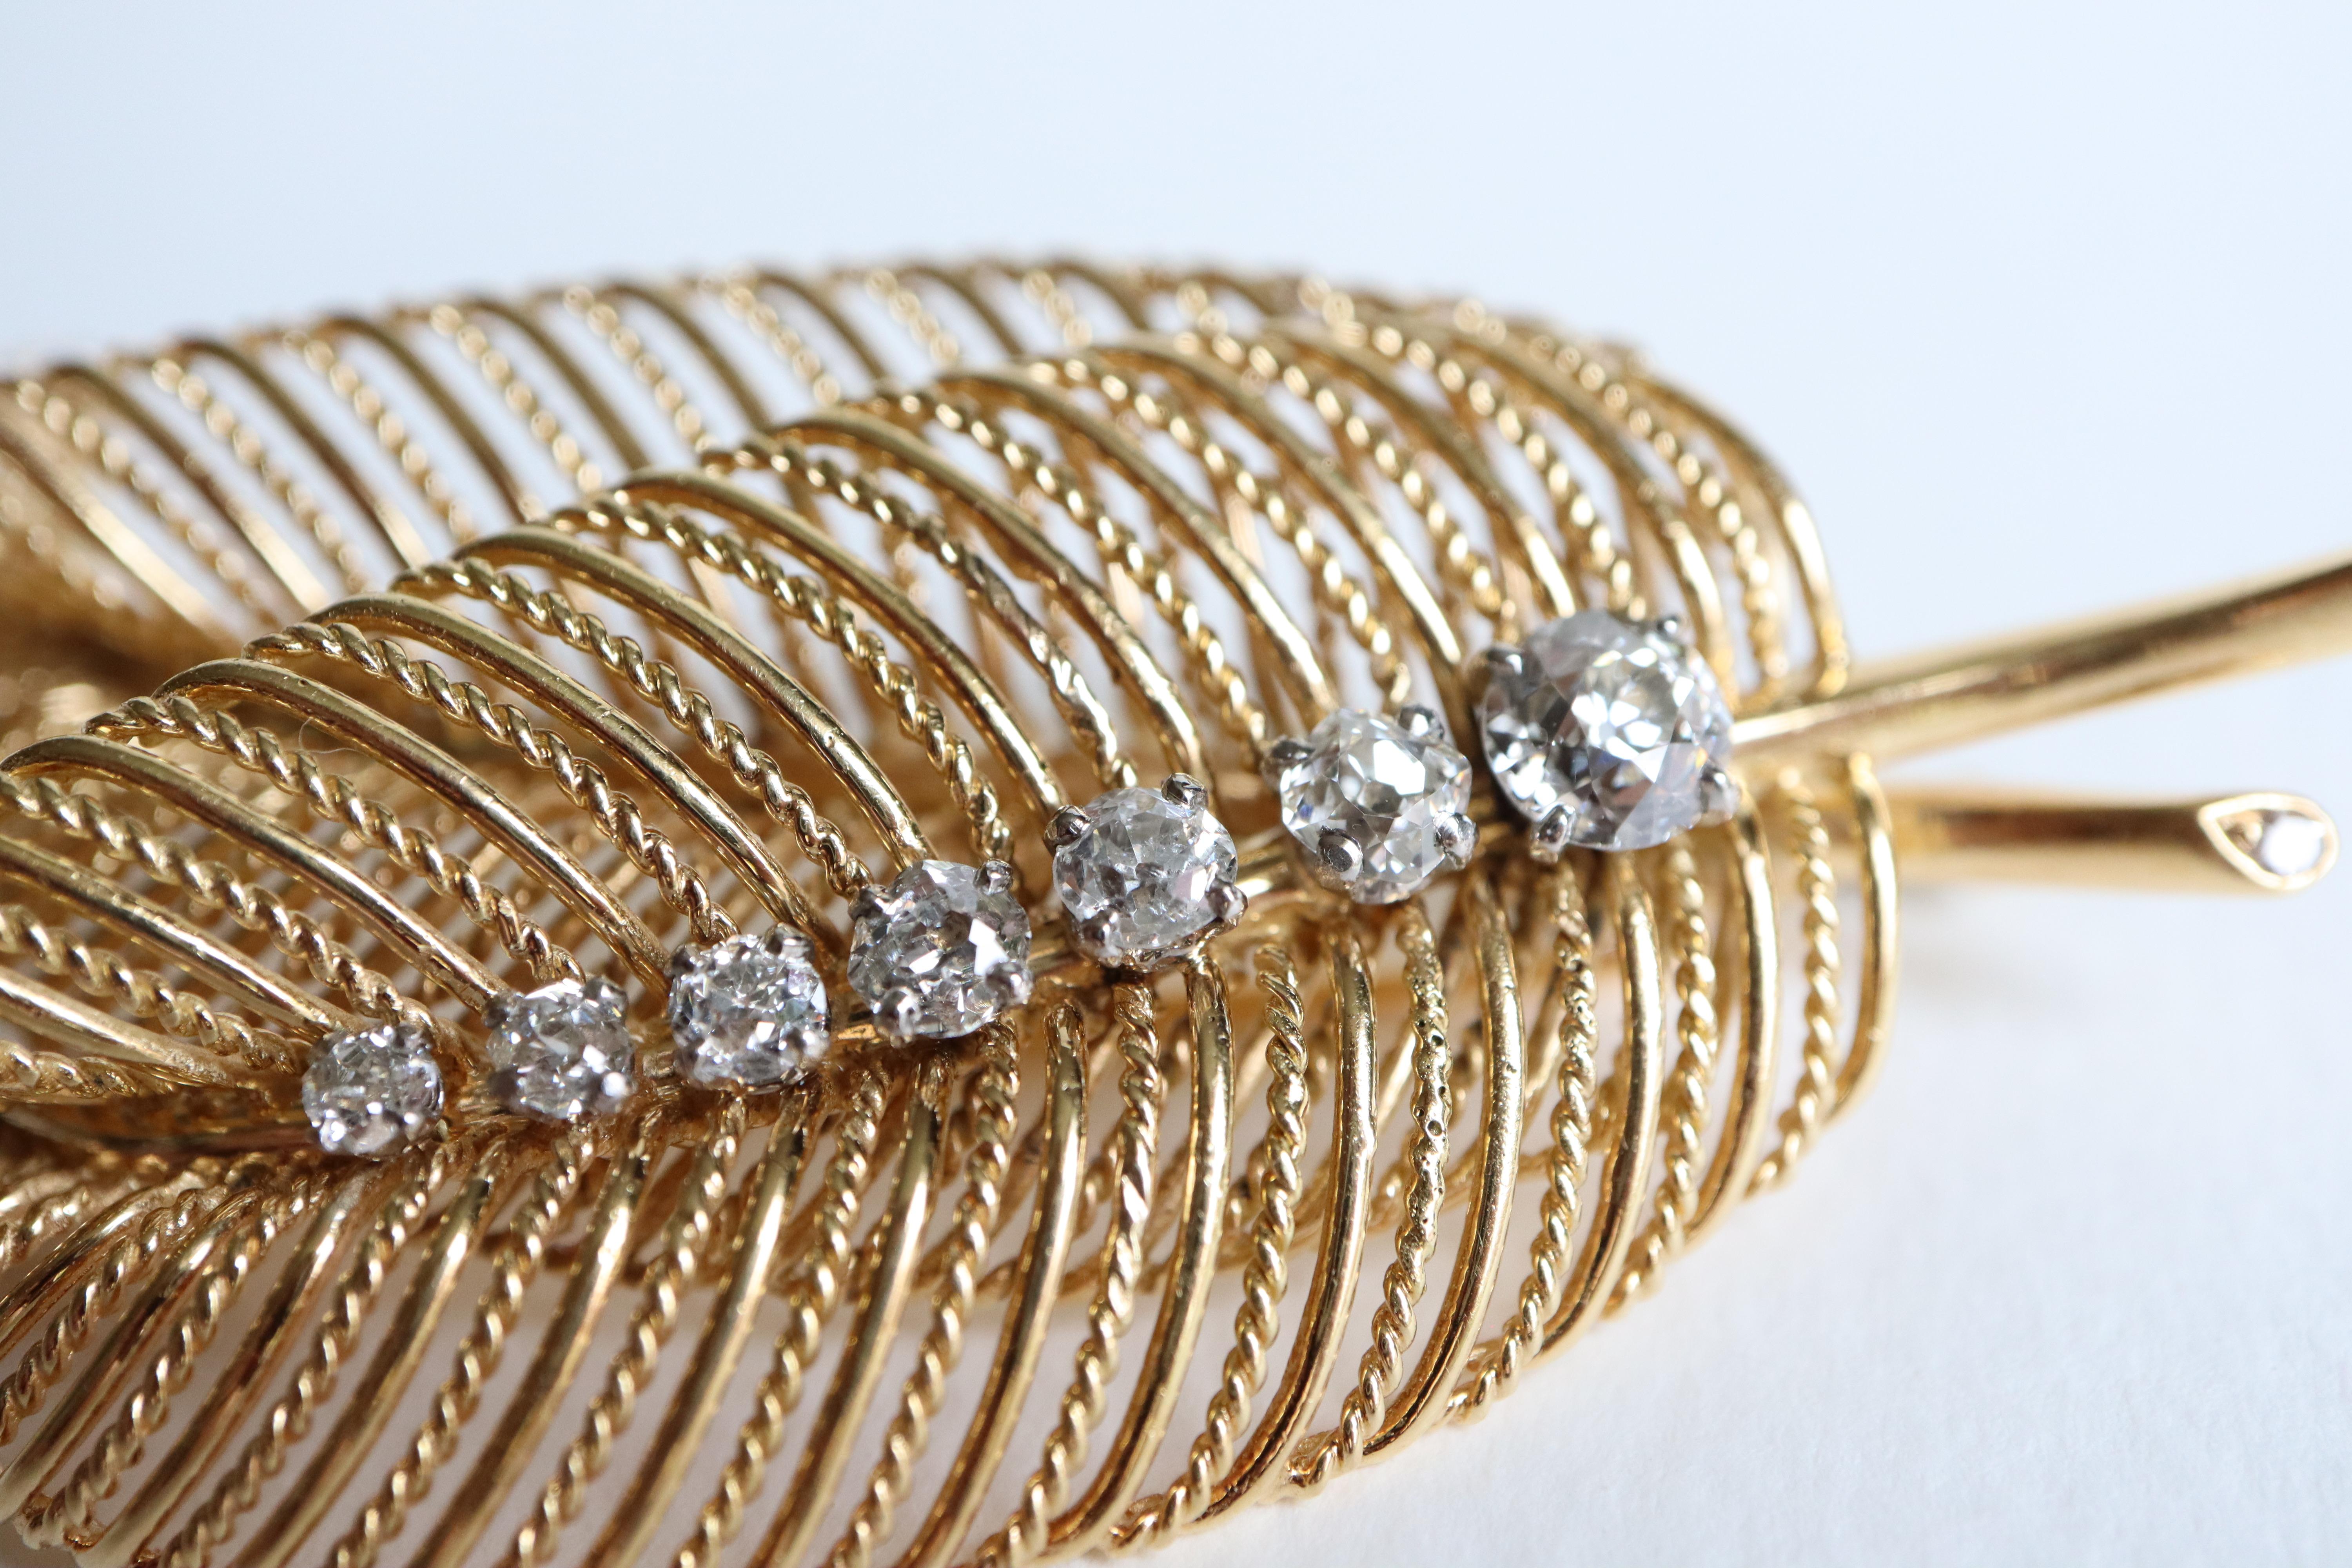 Two leaf brooch 18 kt yellow gold wire circa 1950 adorned with 7 brilliant cut diamonds
The 7 diamonds total approximately 1.5 carats
The tips of the leaf stems are each set with a diamond
Width: 7 cm Height: 4 cm
Gross weight: 26.3 g
French Work of